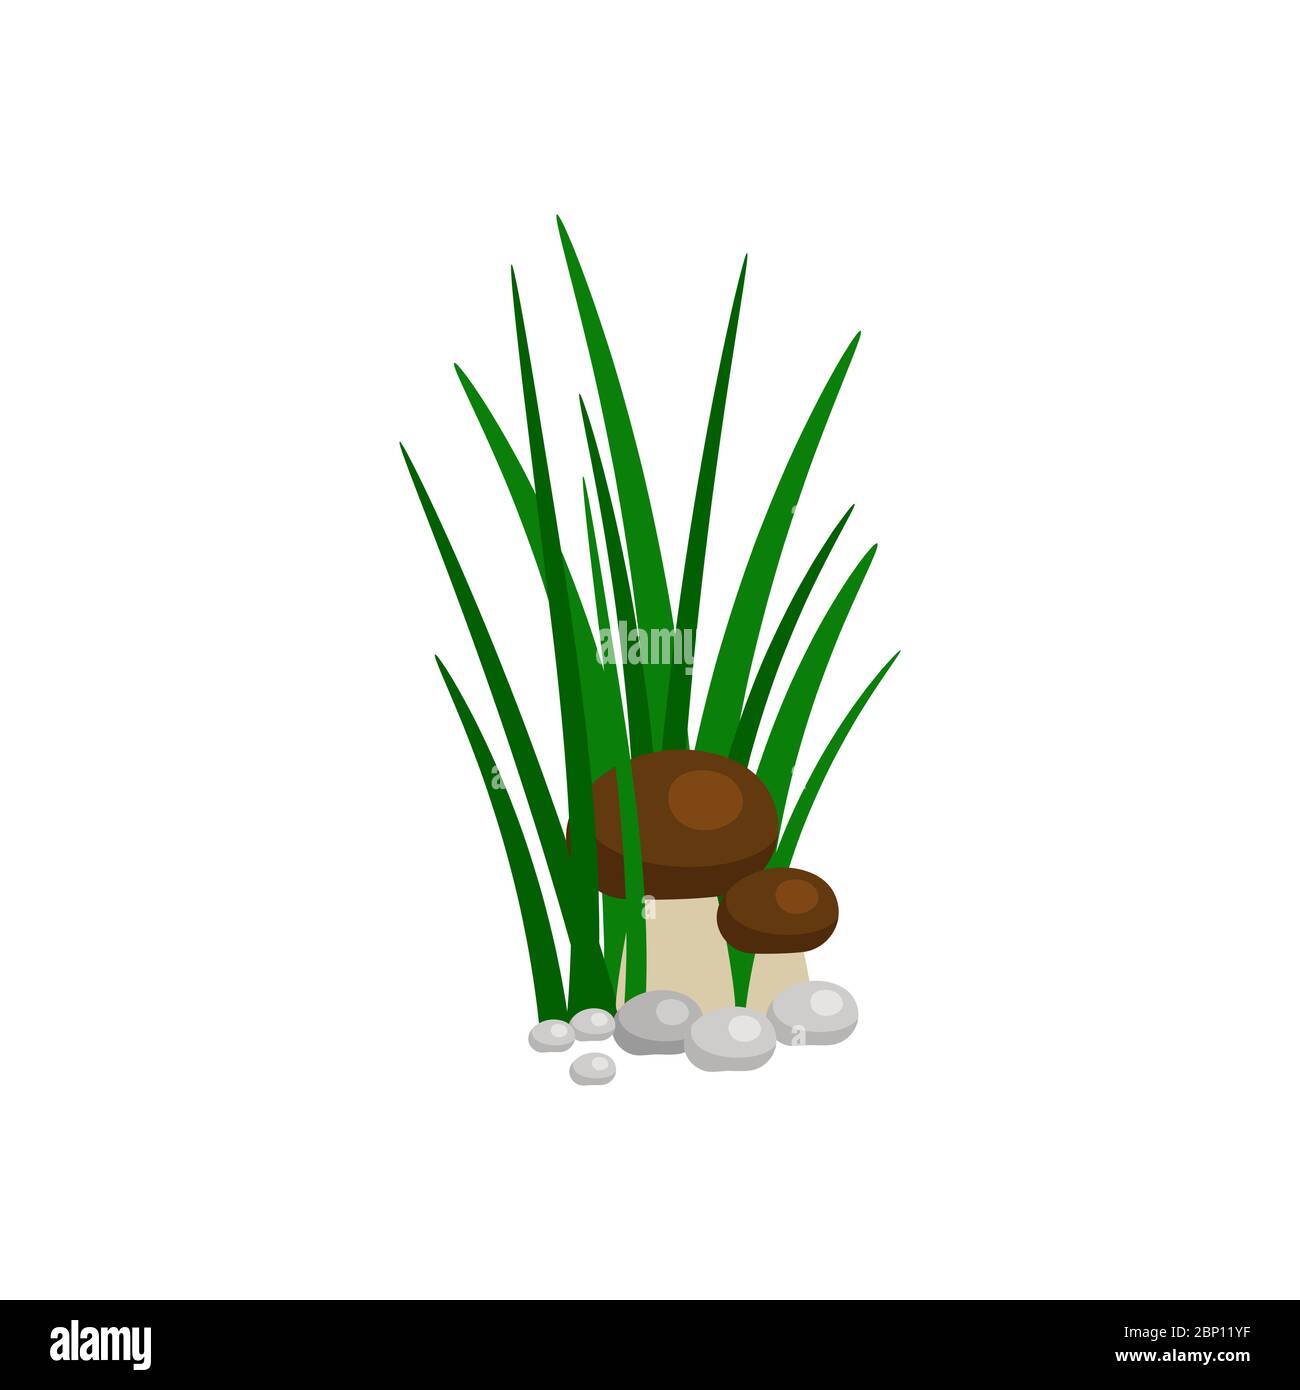 Bush of green grass with mushroom isolated on white background. Vector illustration Stock Vector